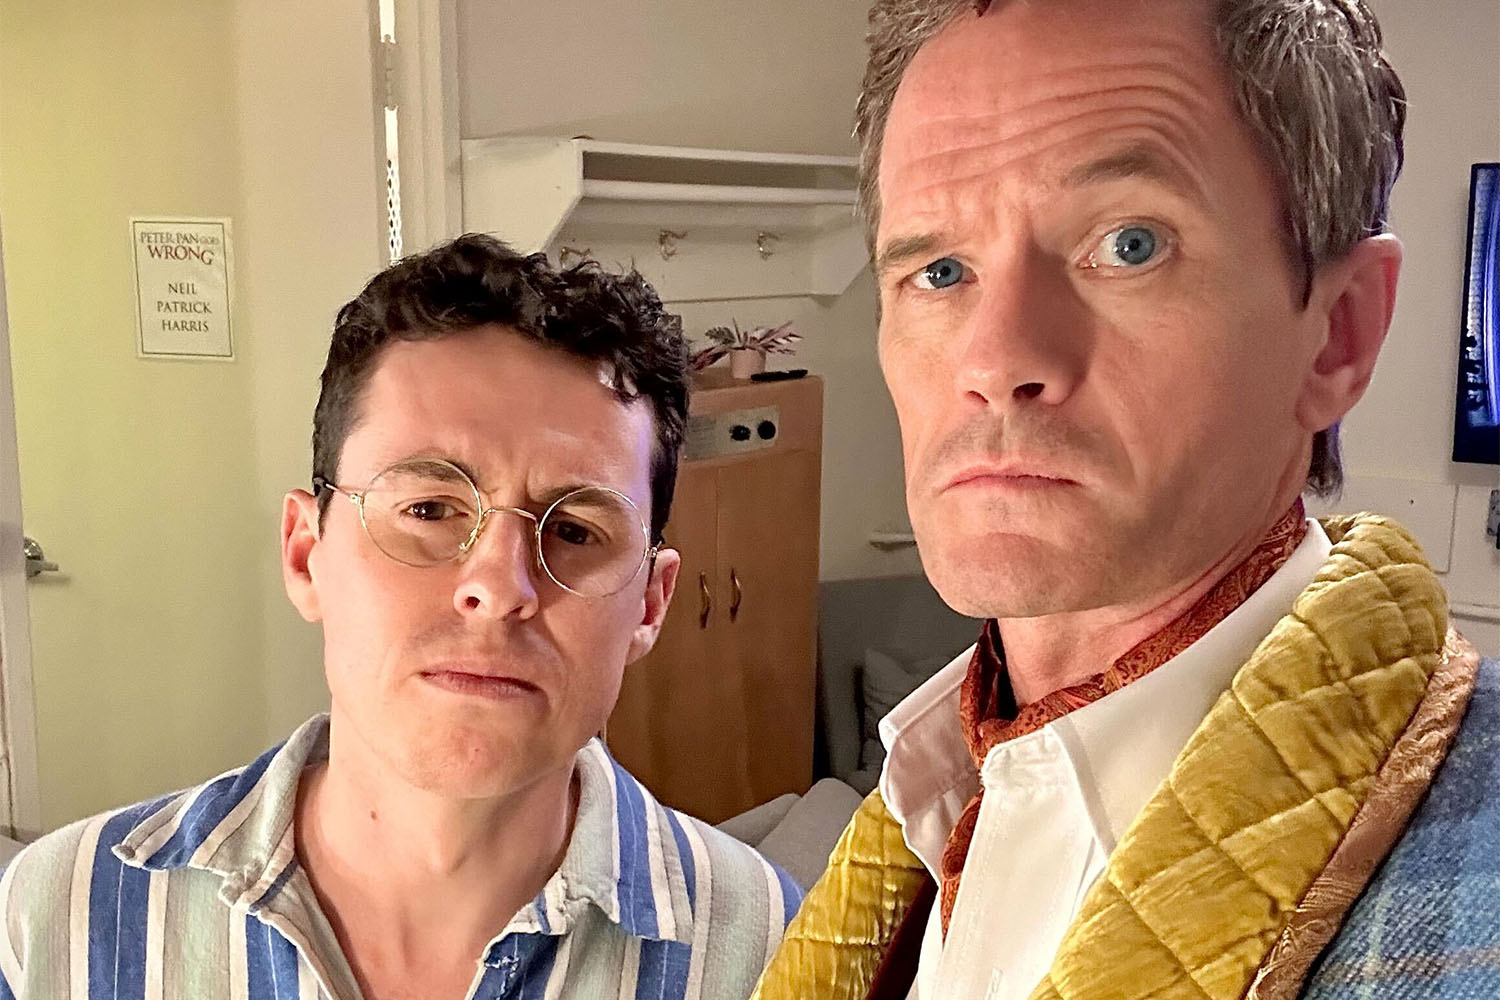 Jonathan Sayer and Neil Patrick Harris behind the scenes at Peter Pan Goes Wrong